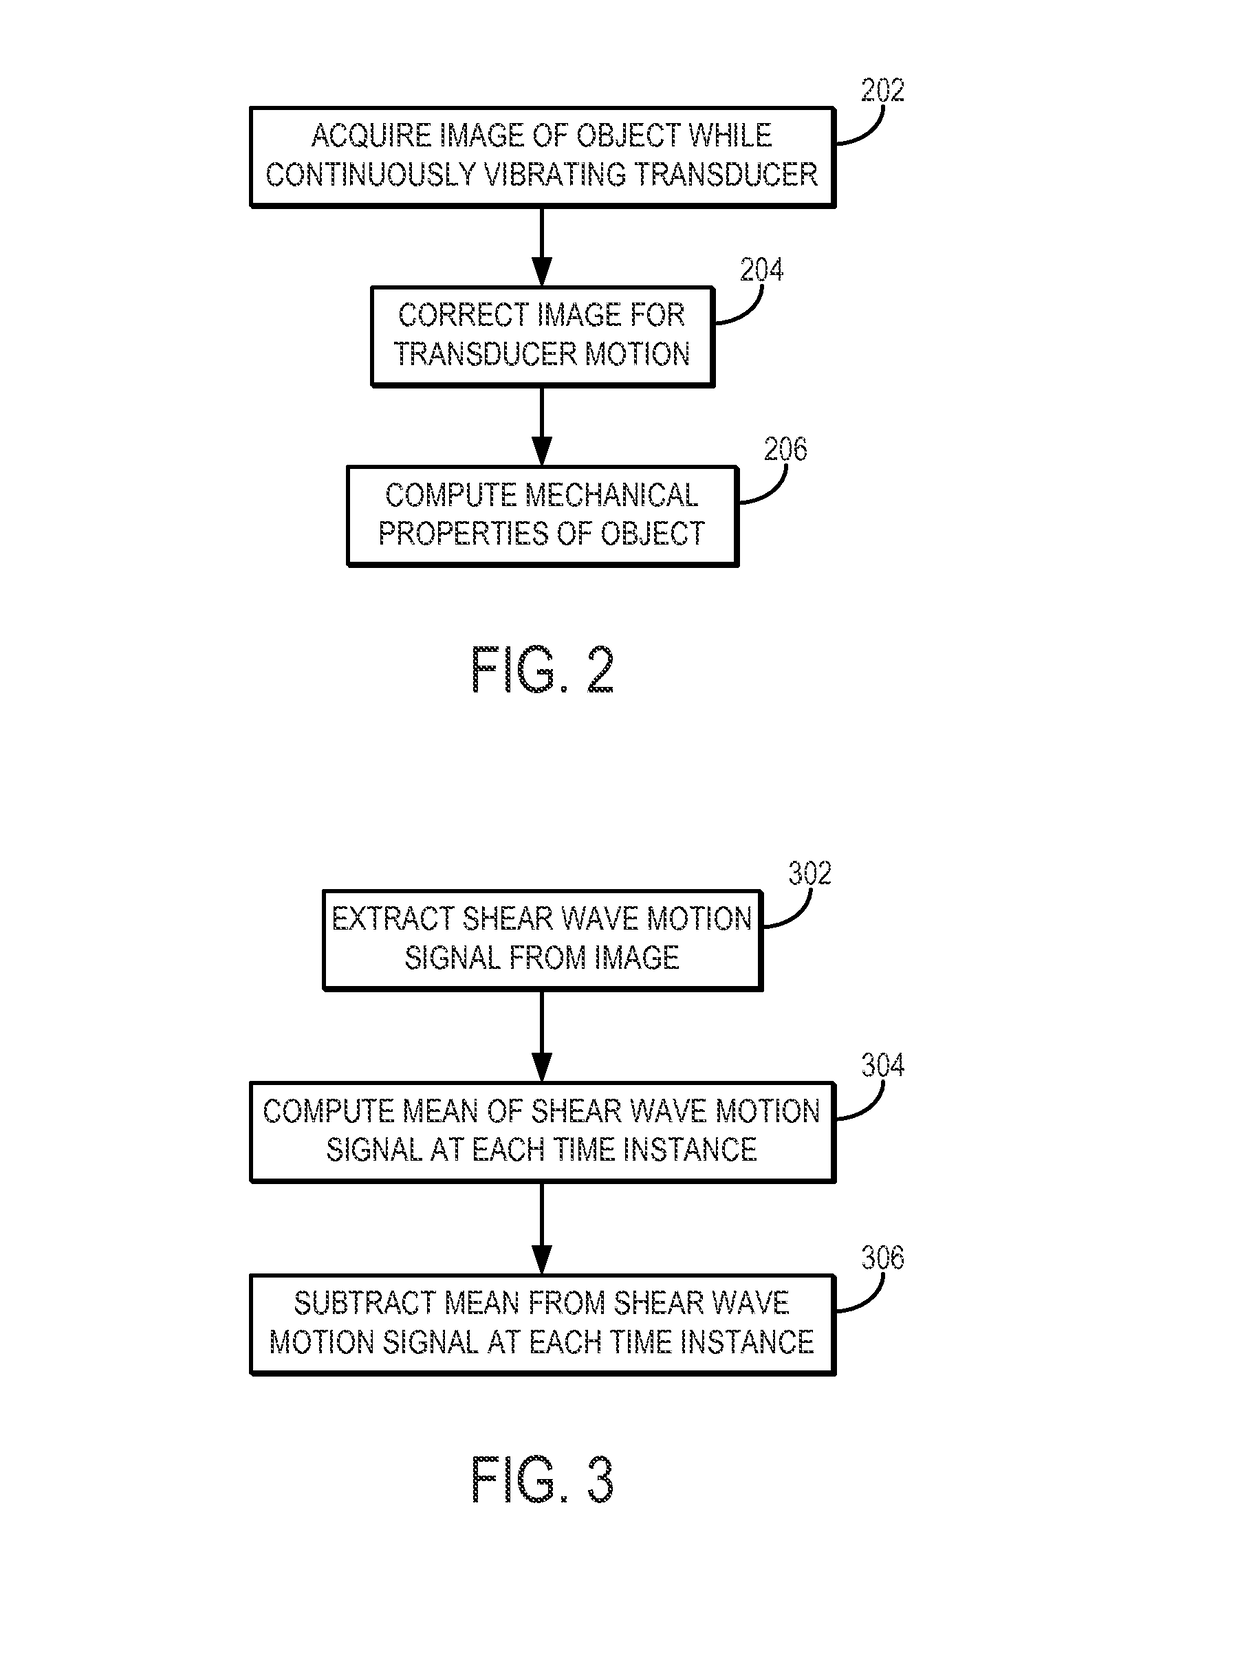 Method for ultrasound elastography through continuous vibration of an ultrasound transducer